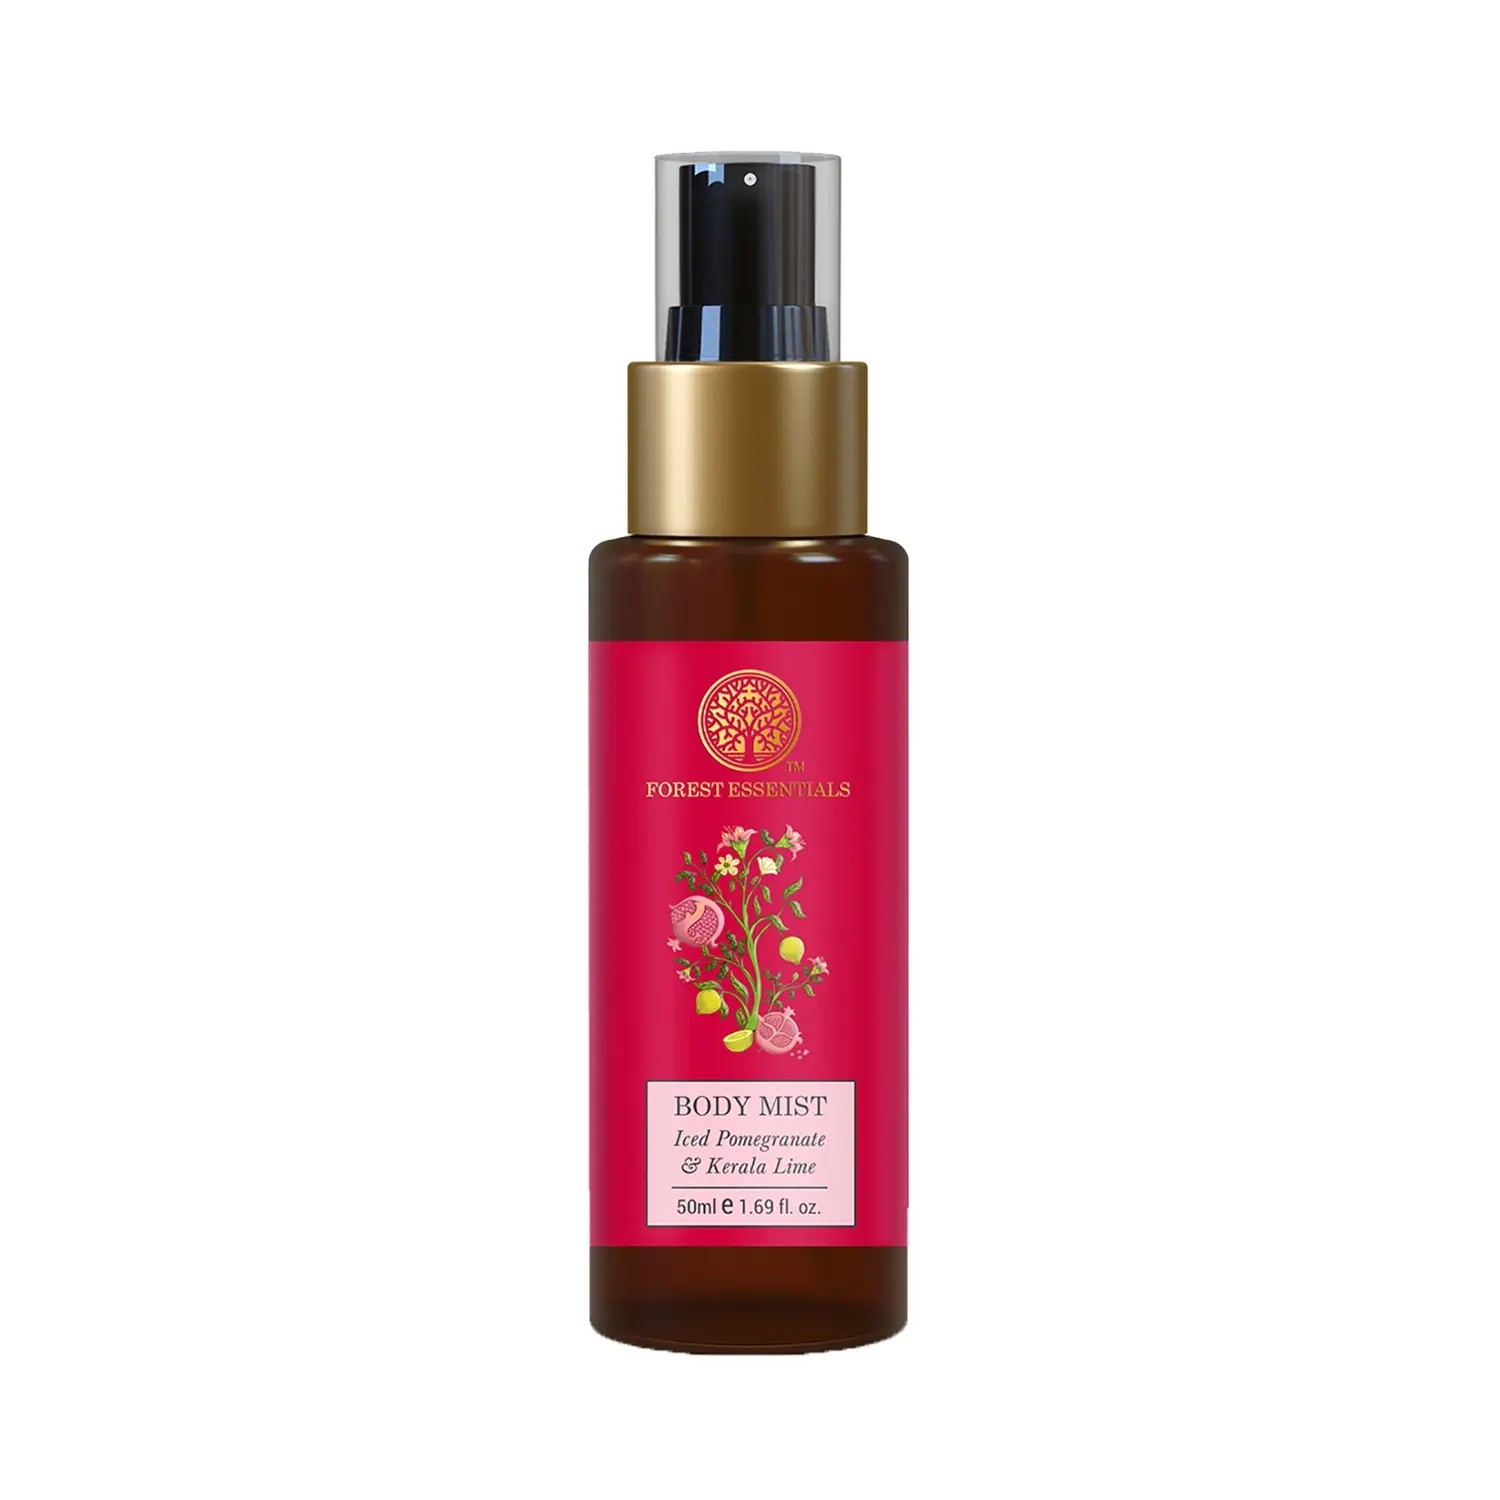 Forest Essentials | Forest Essentials Iced Pomegranate & Kerala Lime Body Mist (50ml)